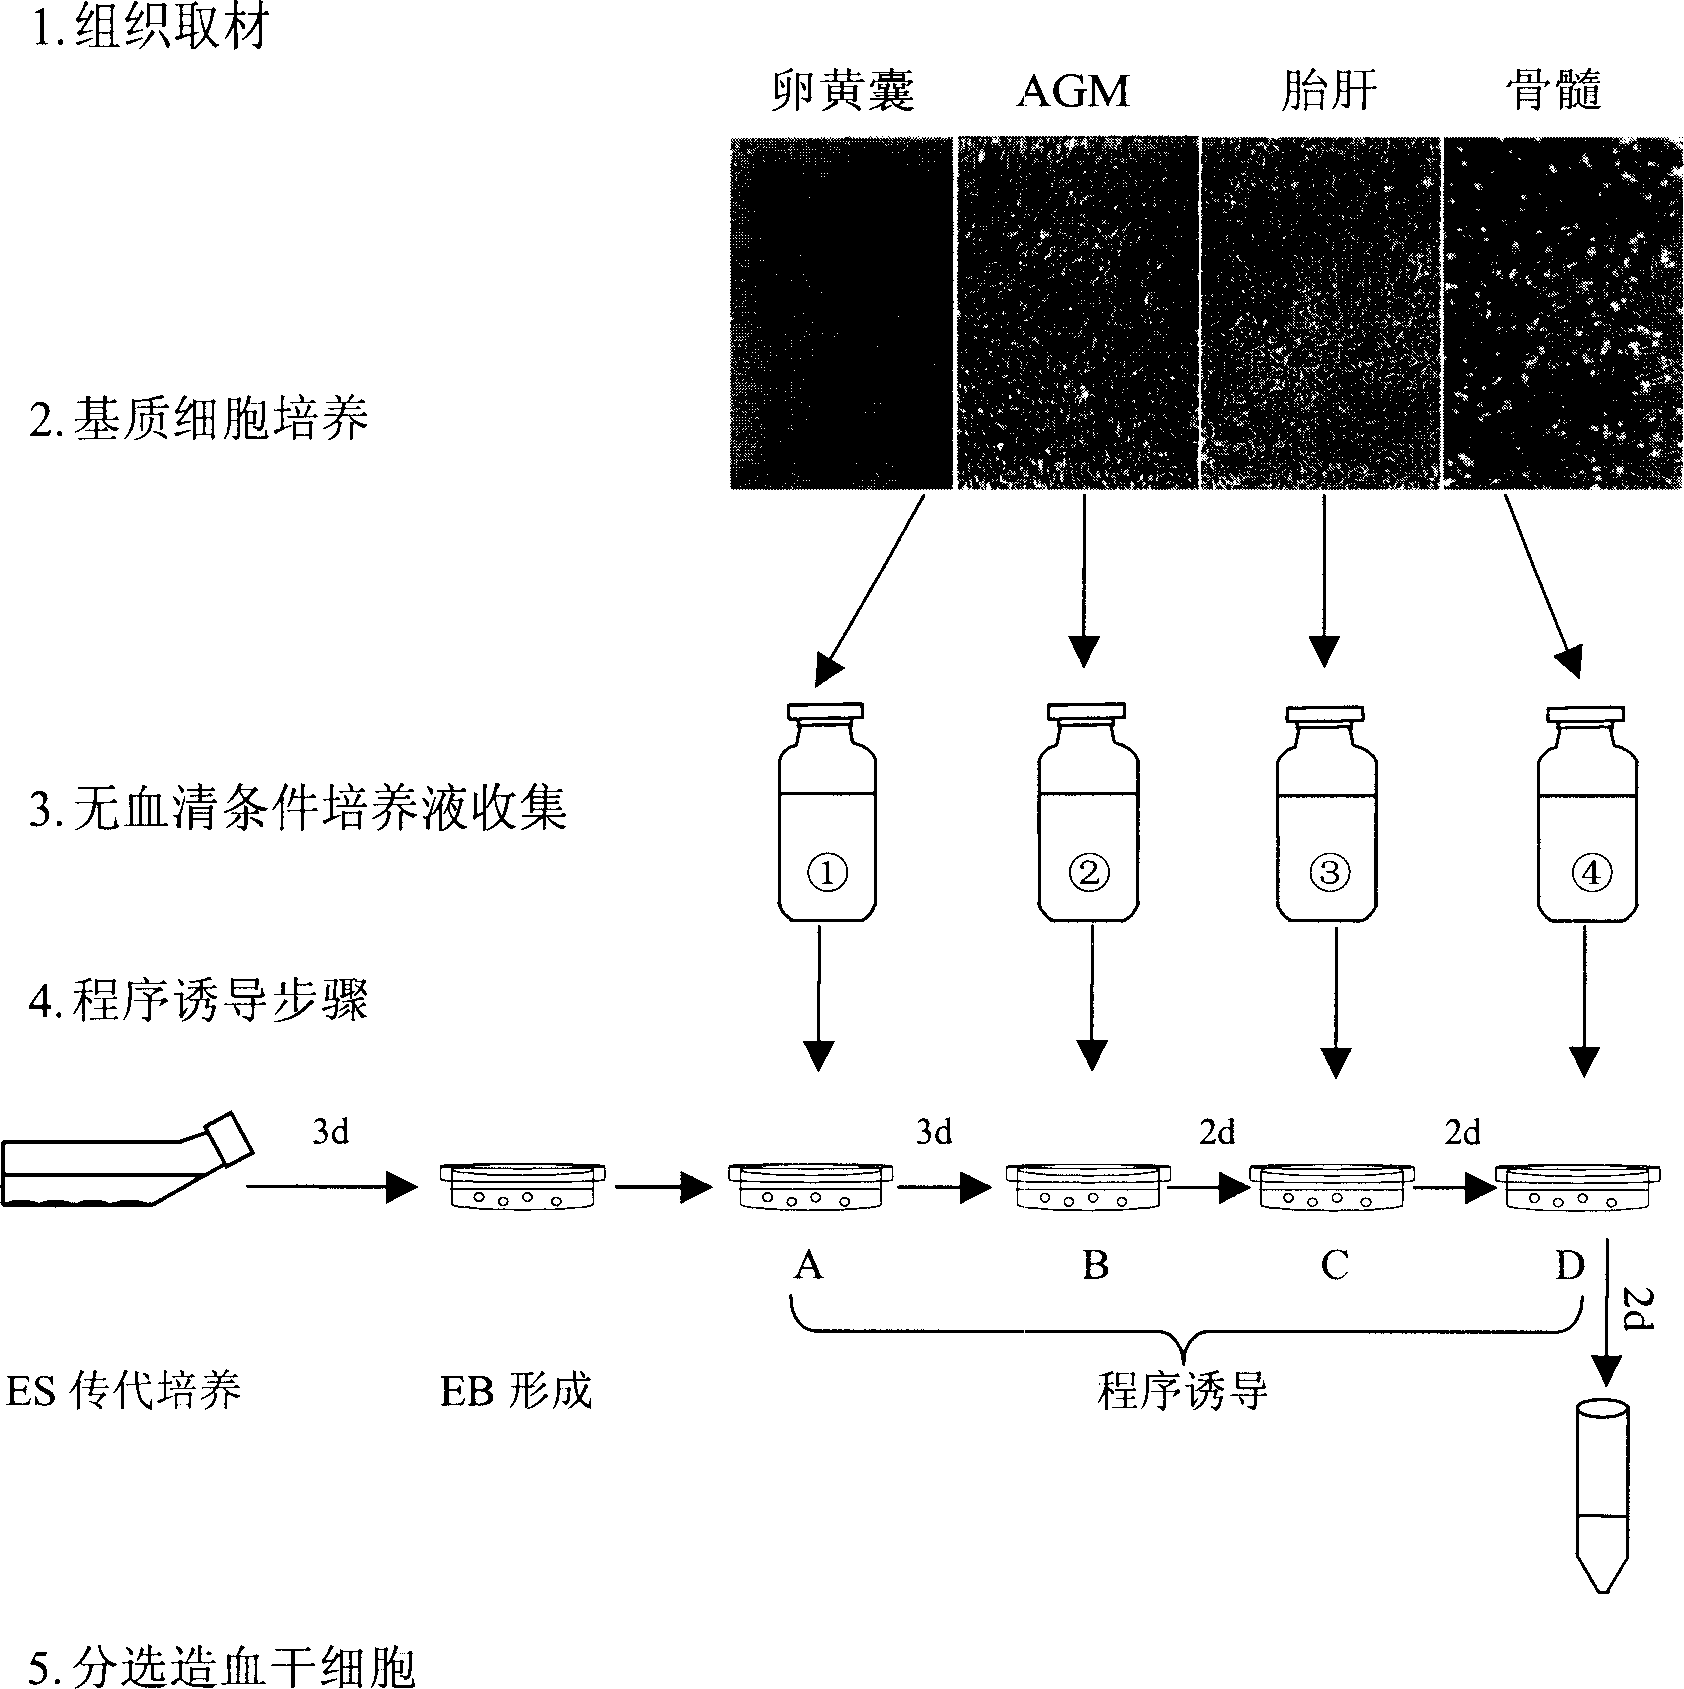 Programmed induction method for promoting embryo stem cell differentiation to hemapoietic stem cell